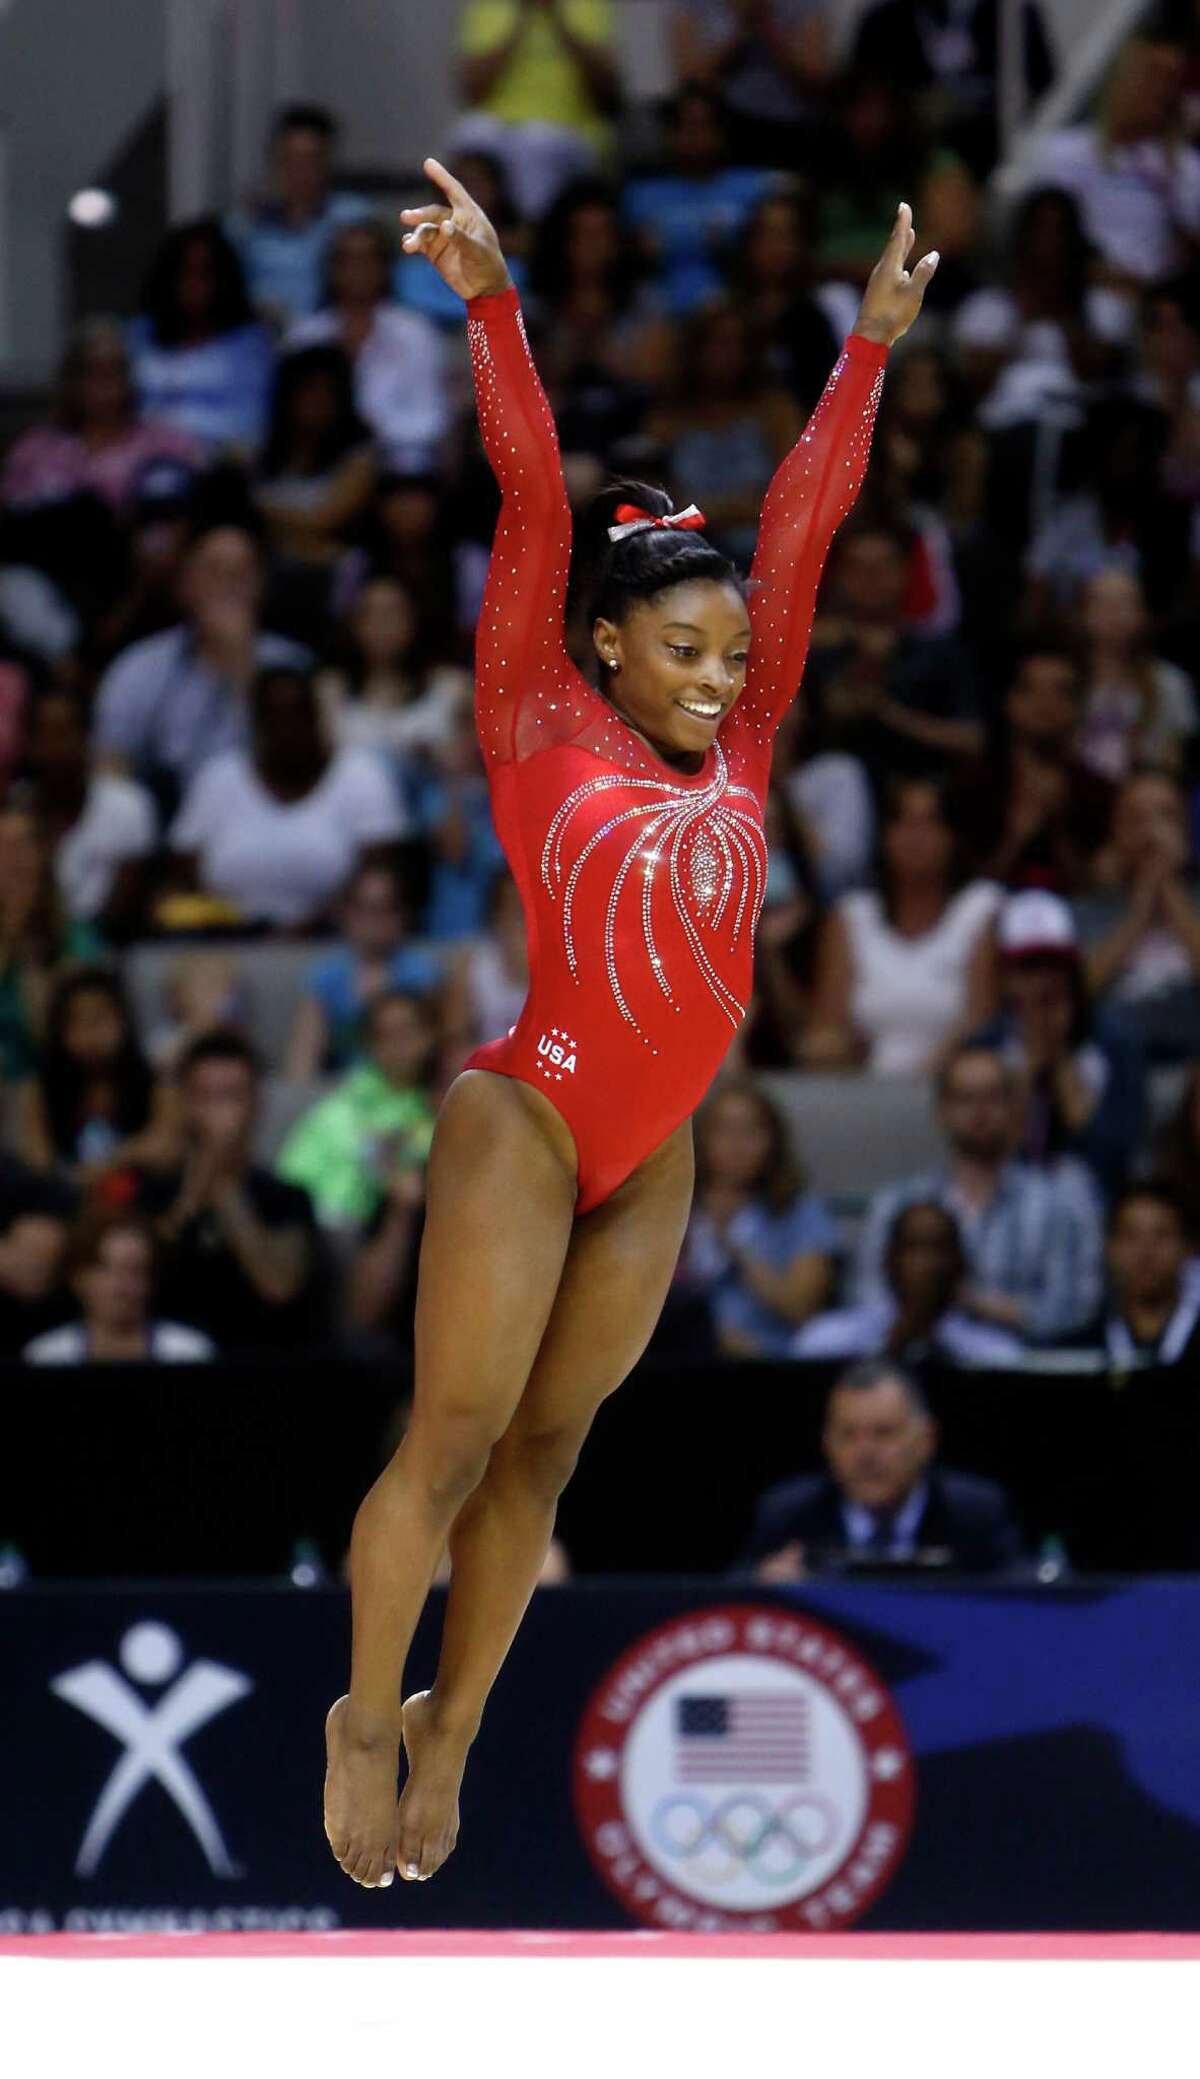 NBC announcer apologizes for comment about Simone Biles' family